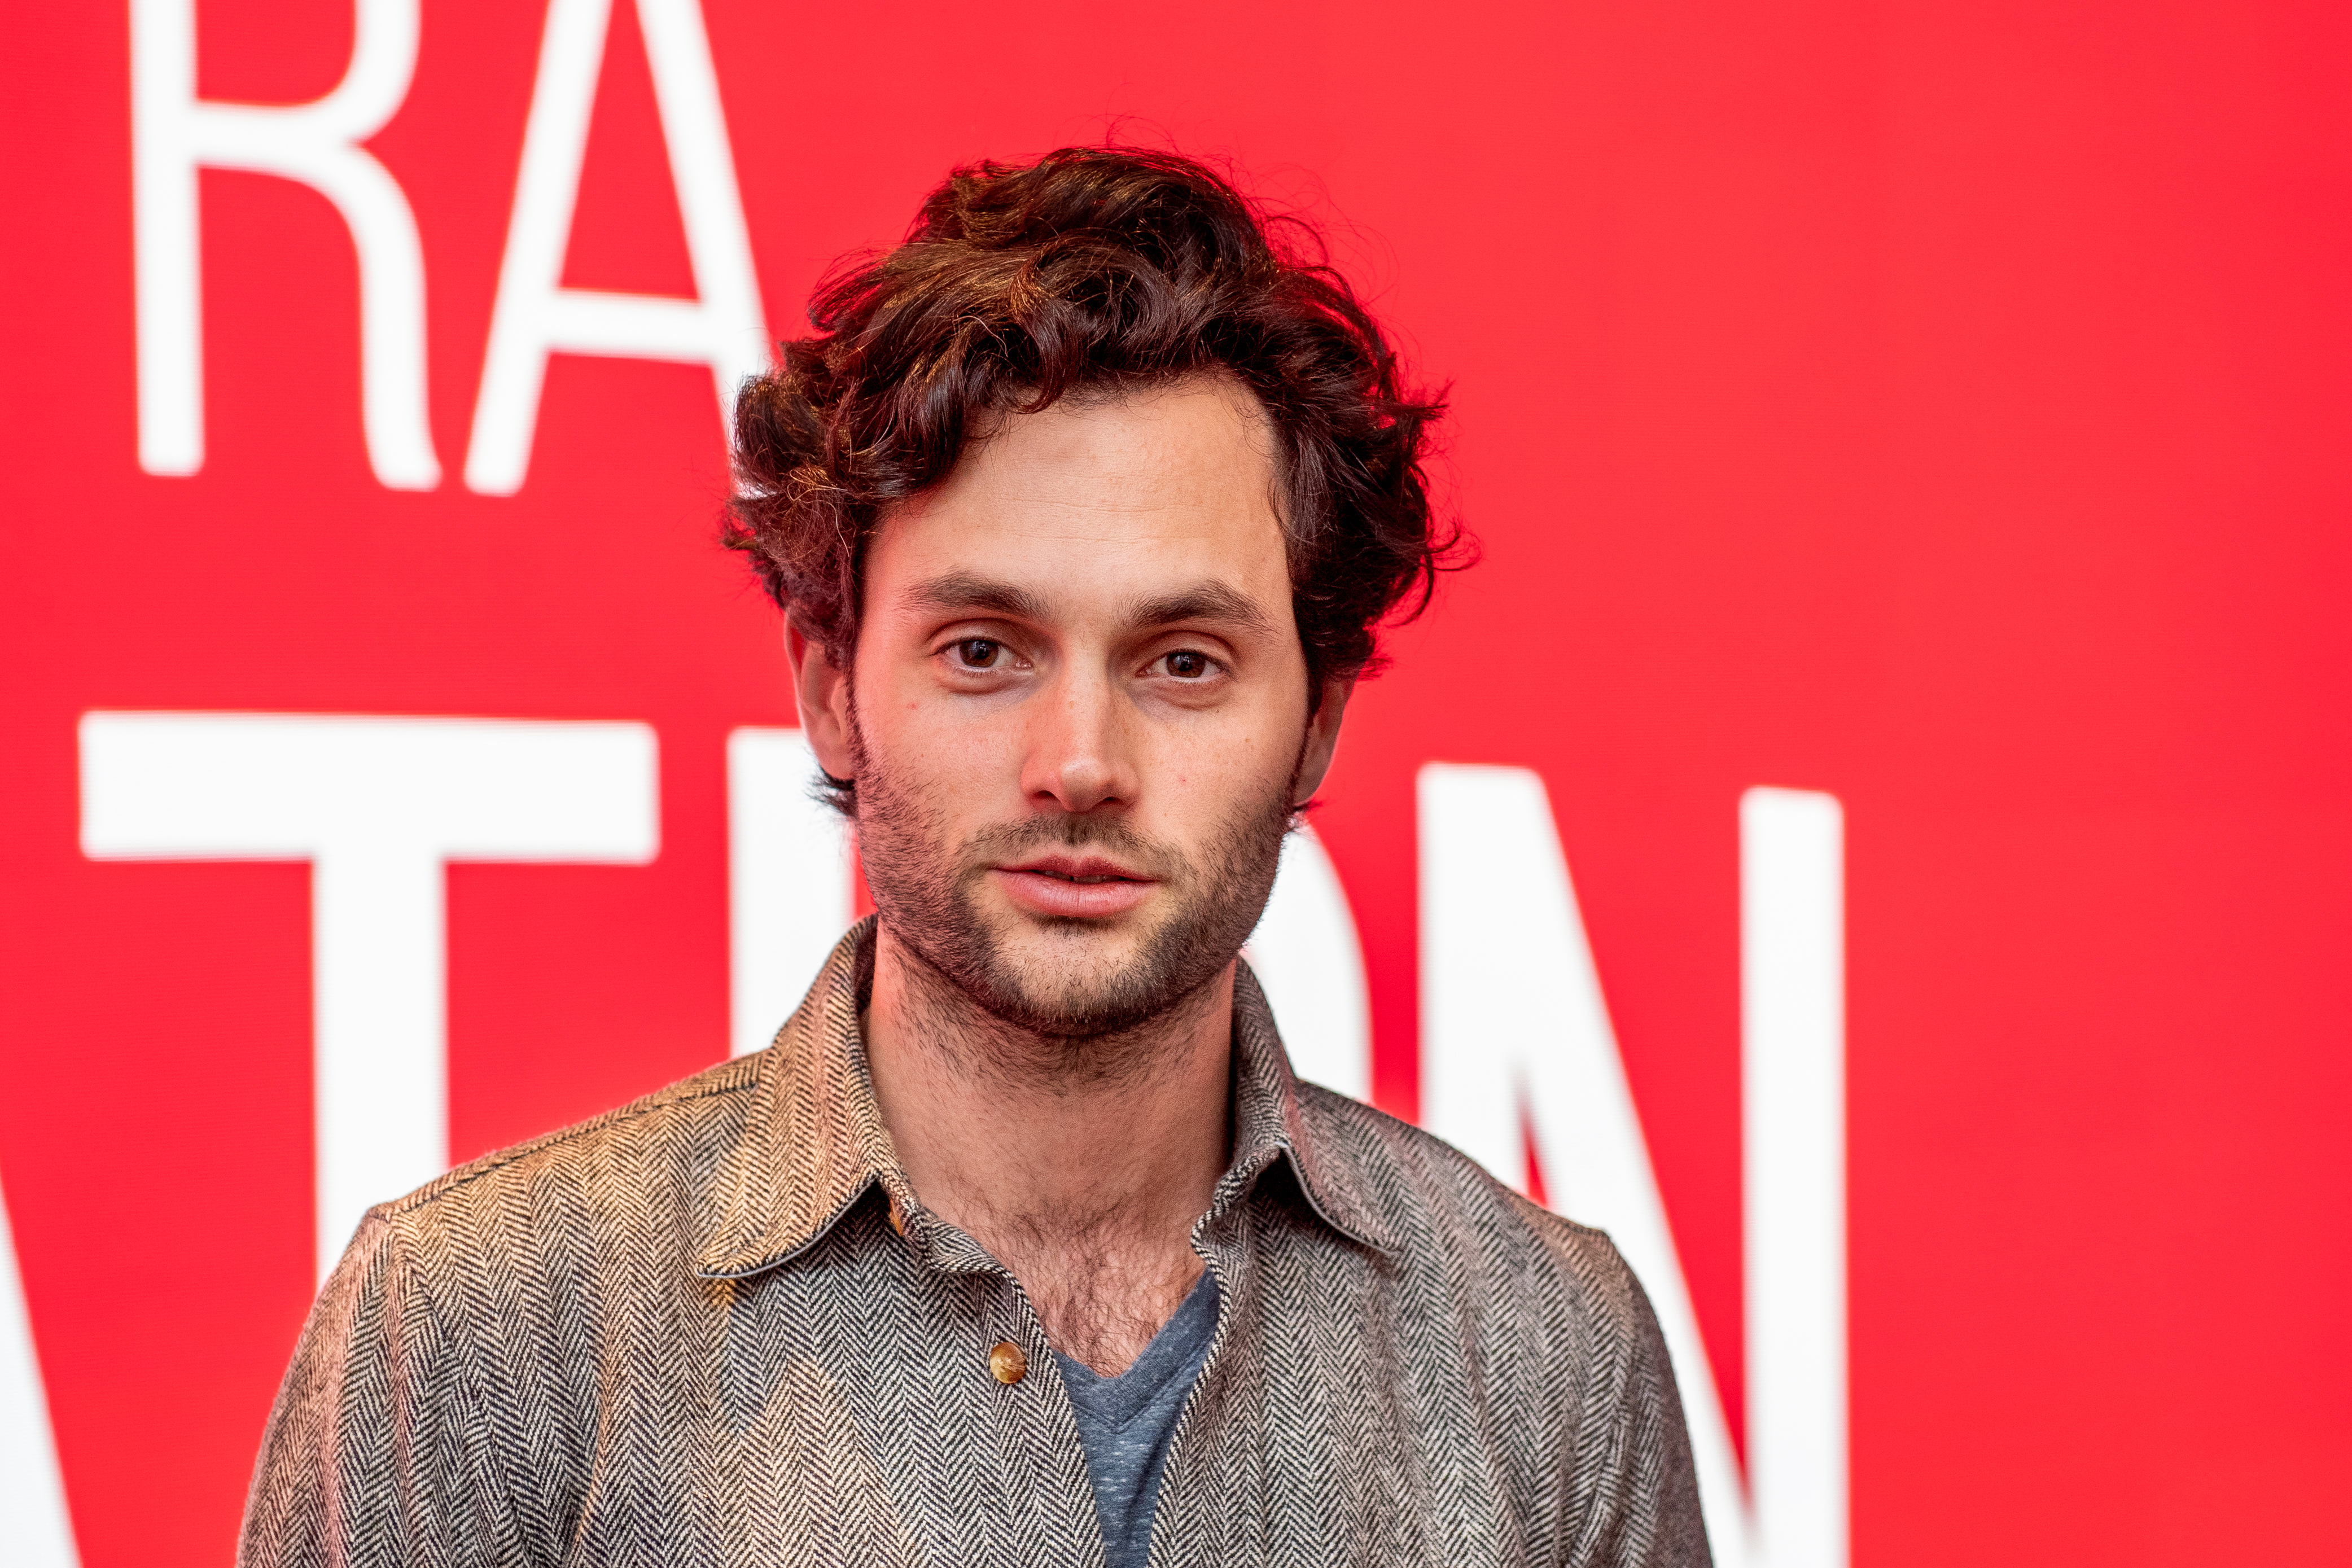 Penn Badgley discusses "You" during SAG-AFTRA Foundation Conversations at The Robin Williams Center on October 16, 2018, in New York City. | Source: Getty Images